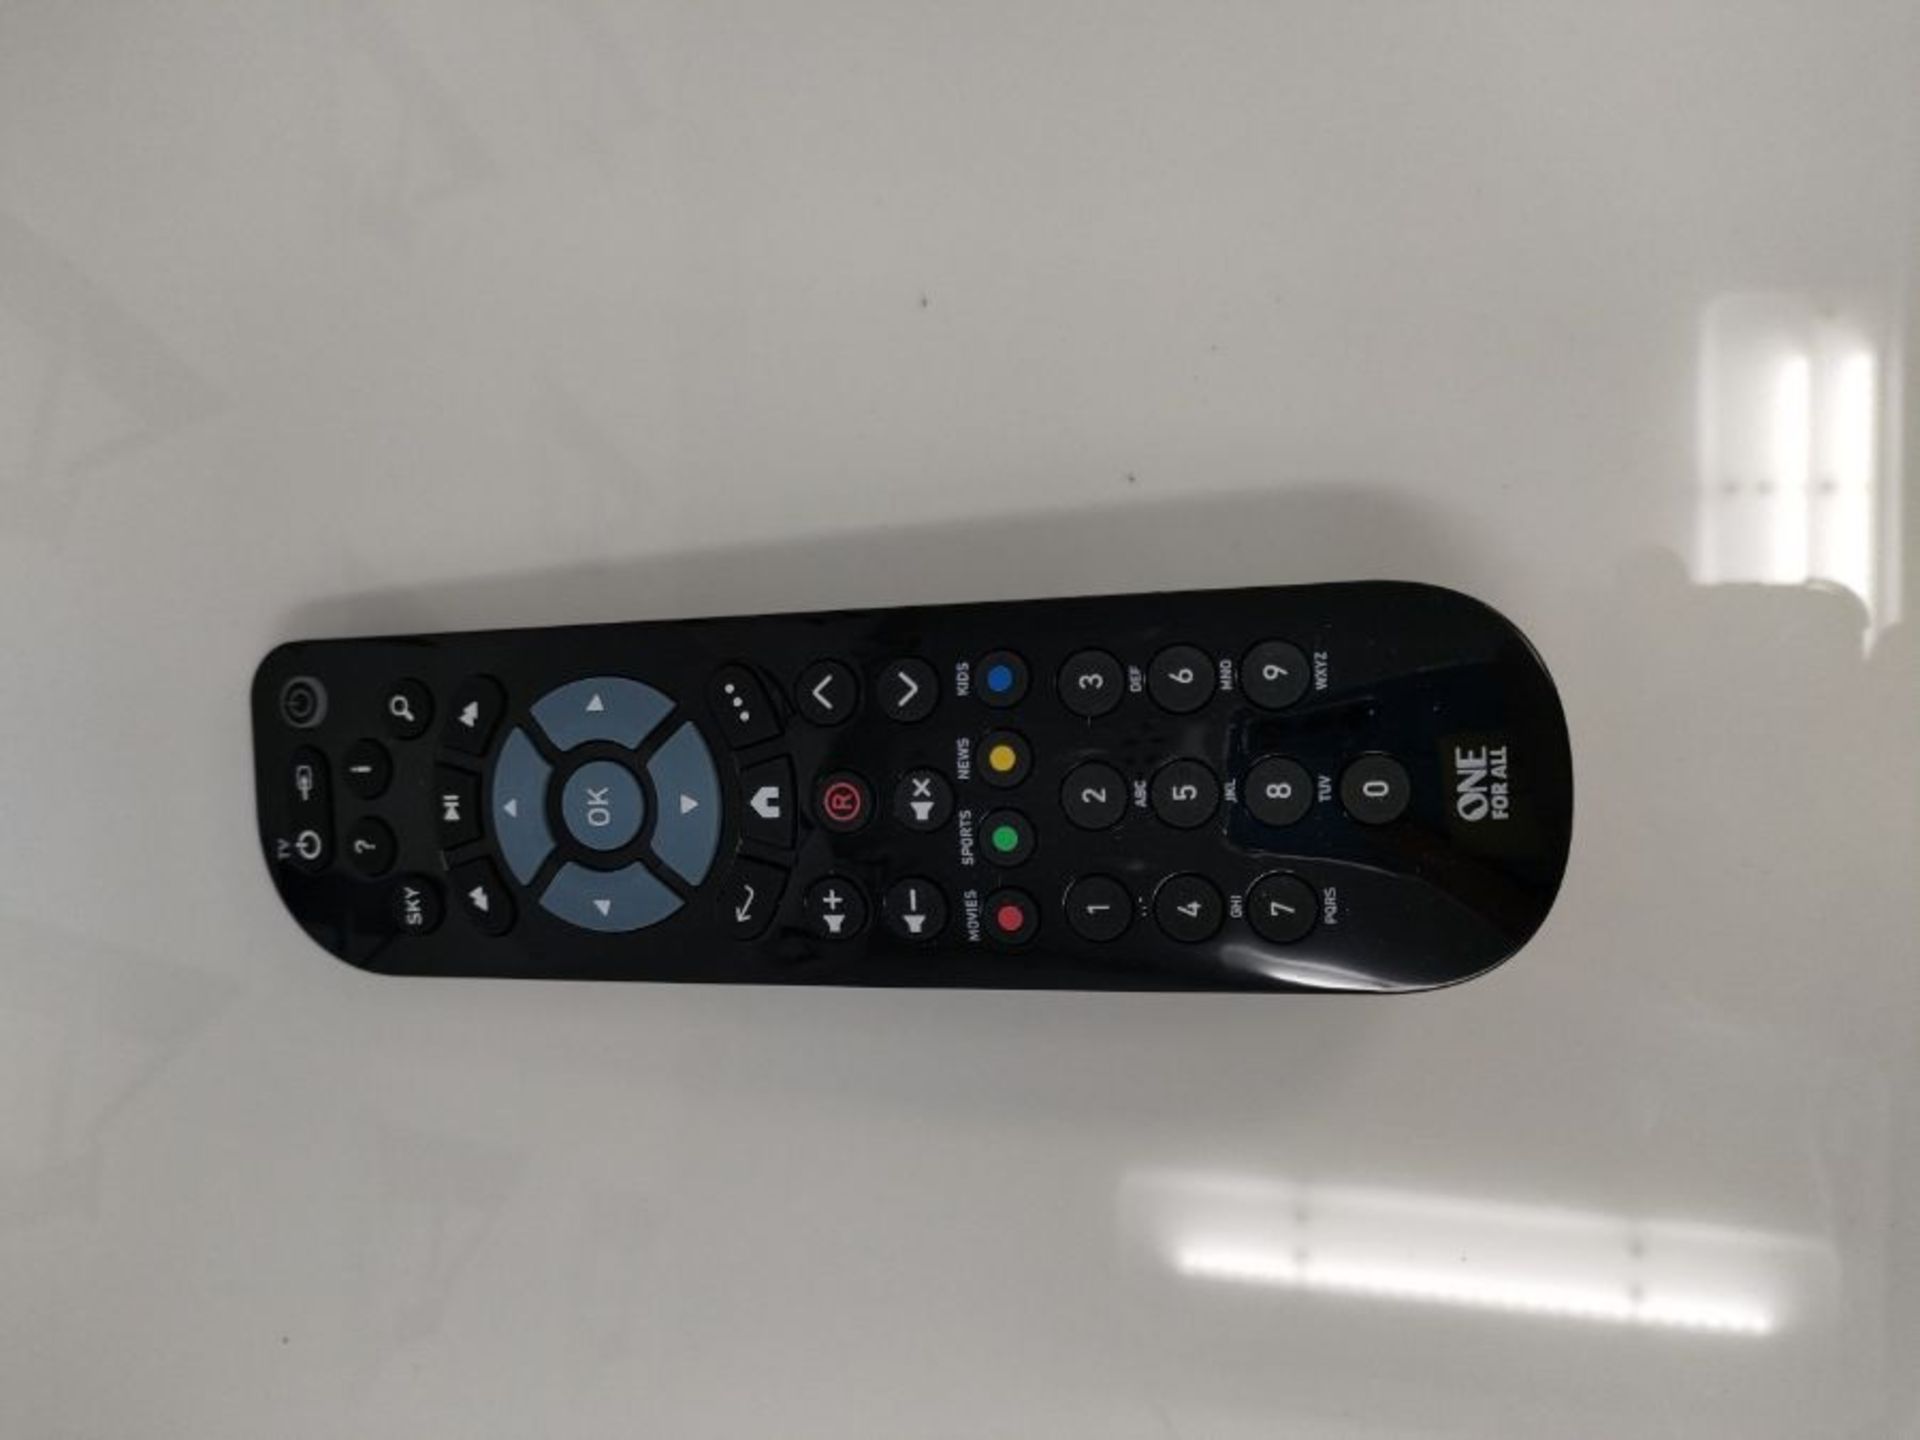 One For All remote control, compatible with Sky receivers, one-touch keys, URC1635 - Image 3 of 3